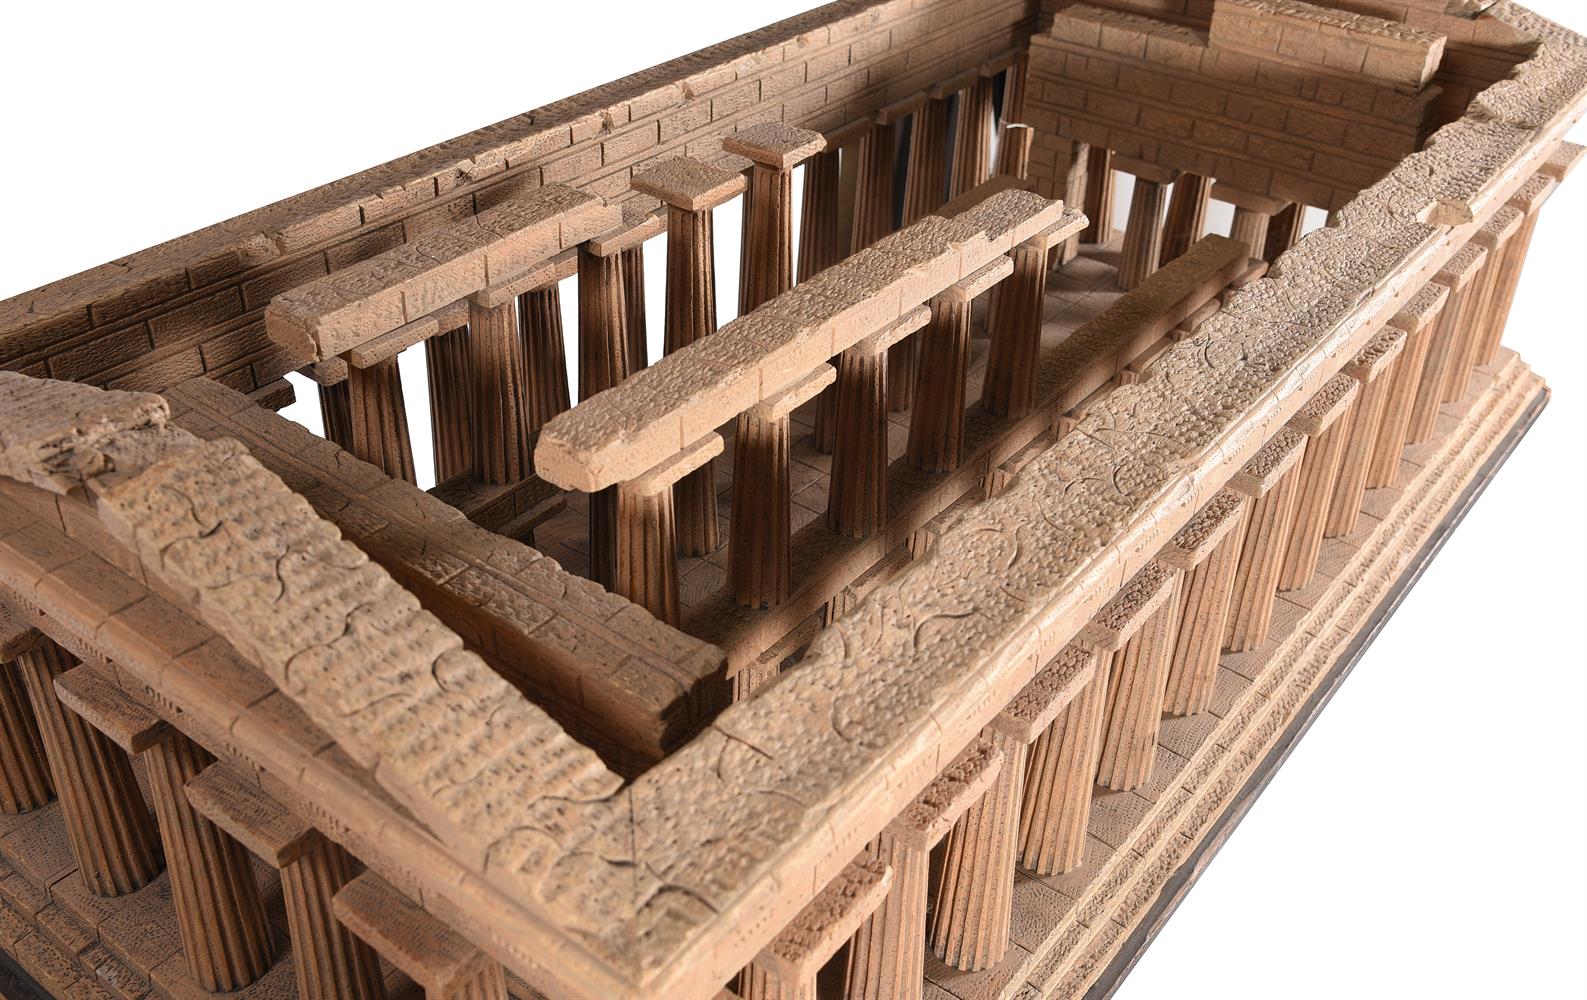 A CARVED 'GRAND TOUR' WOOD MODEL OF THE TEMPLE OF HERA AT PAESTUM, AFTER DOMENICO PADIGLIONE - Image 3 of 5